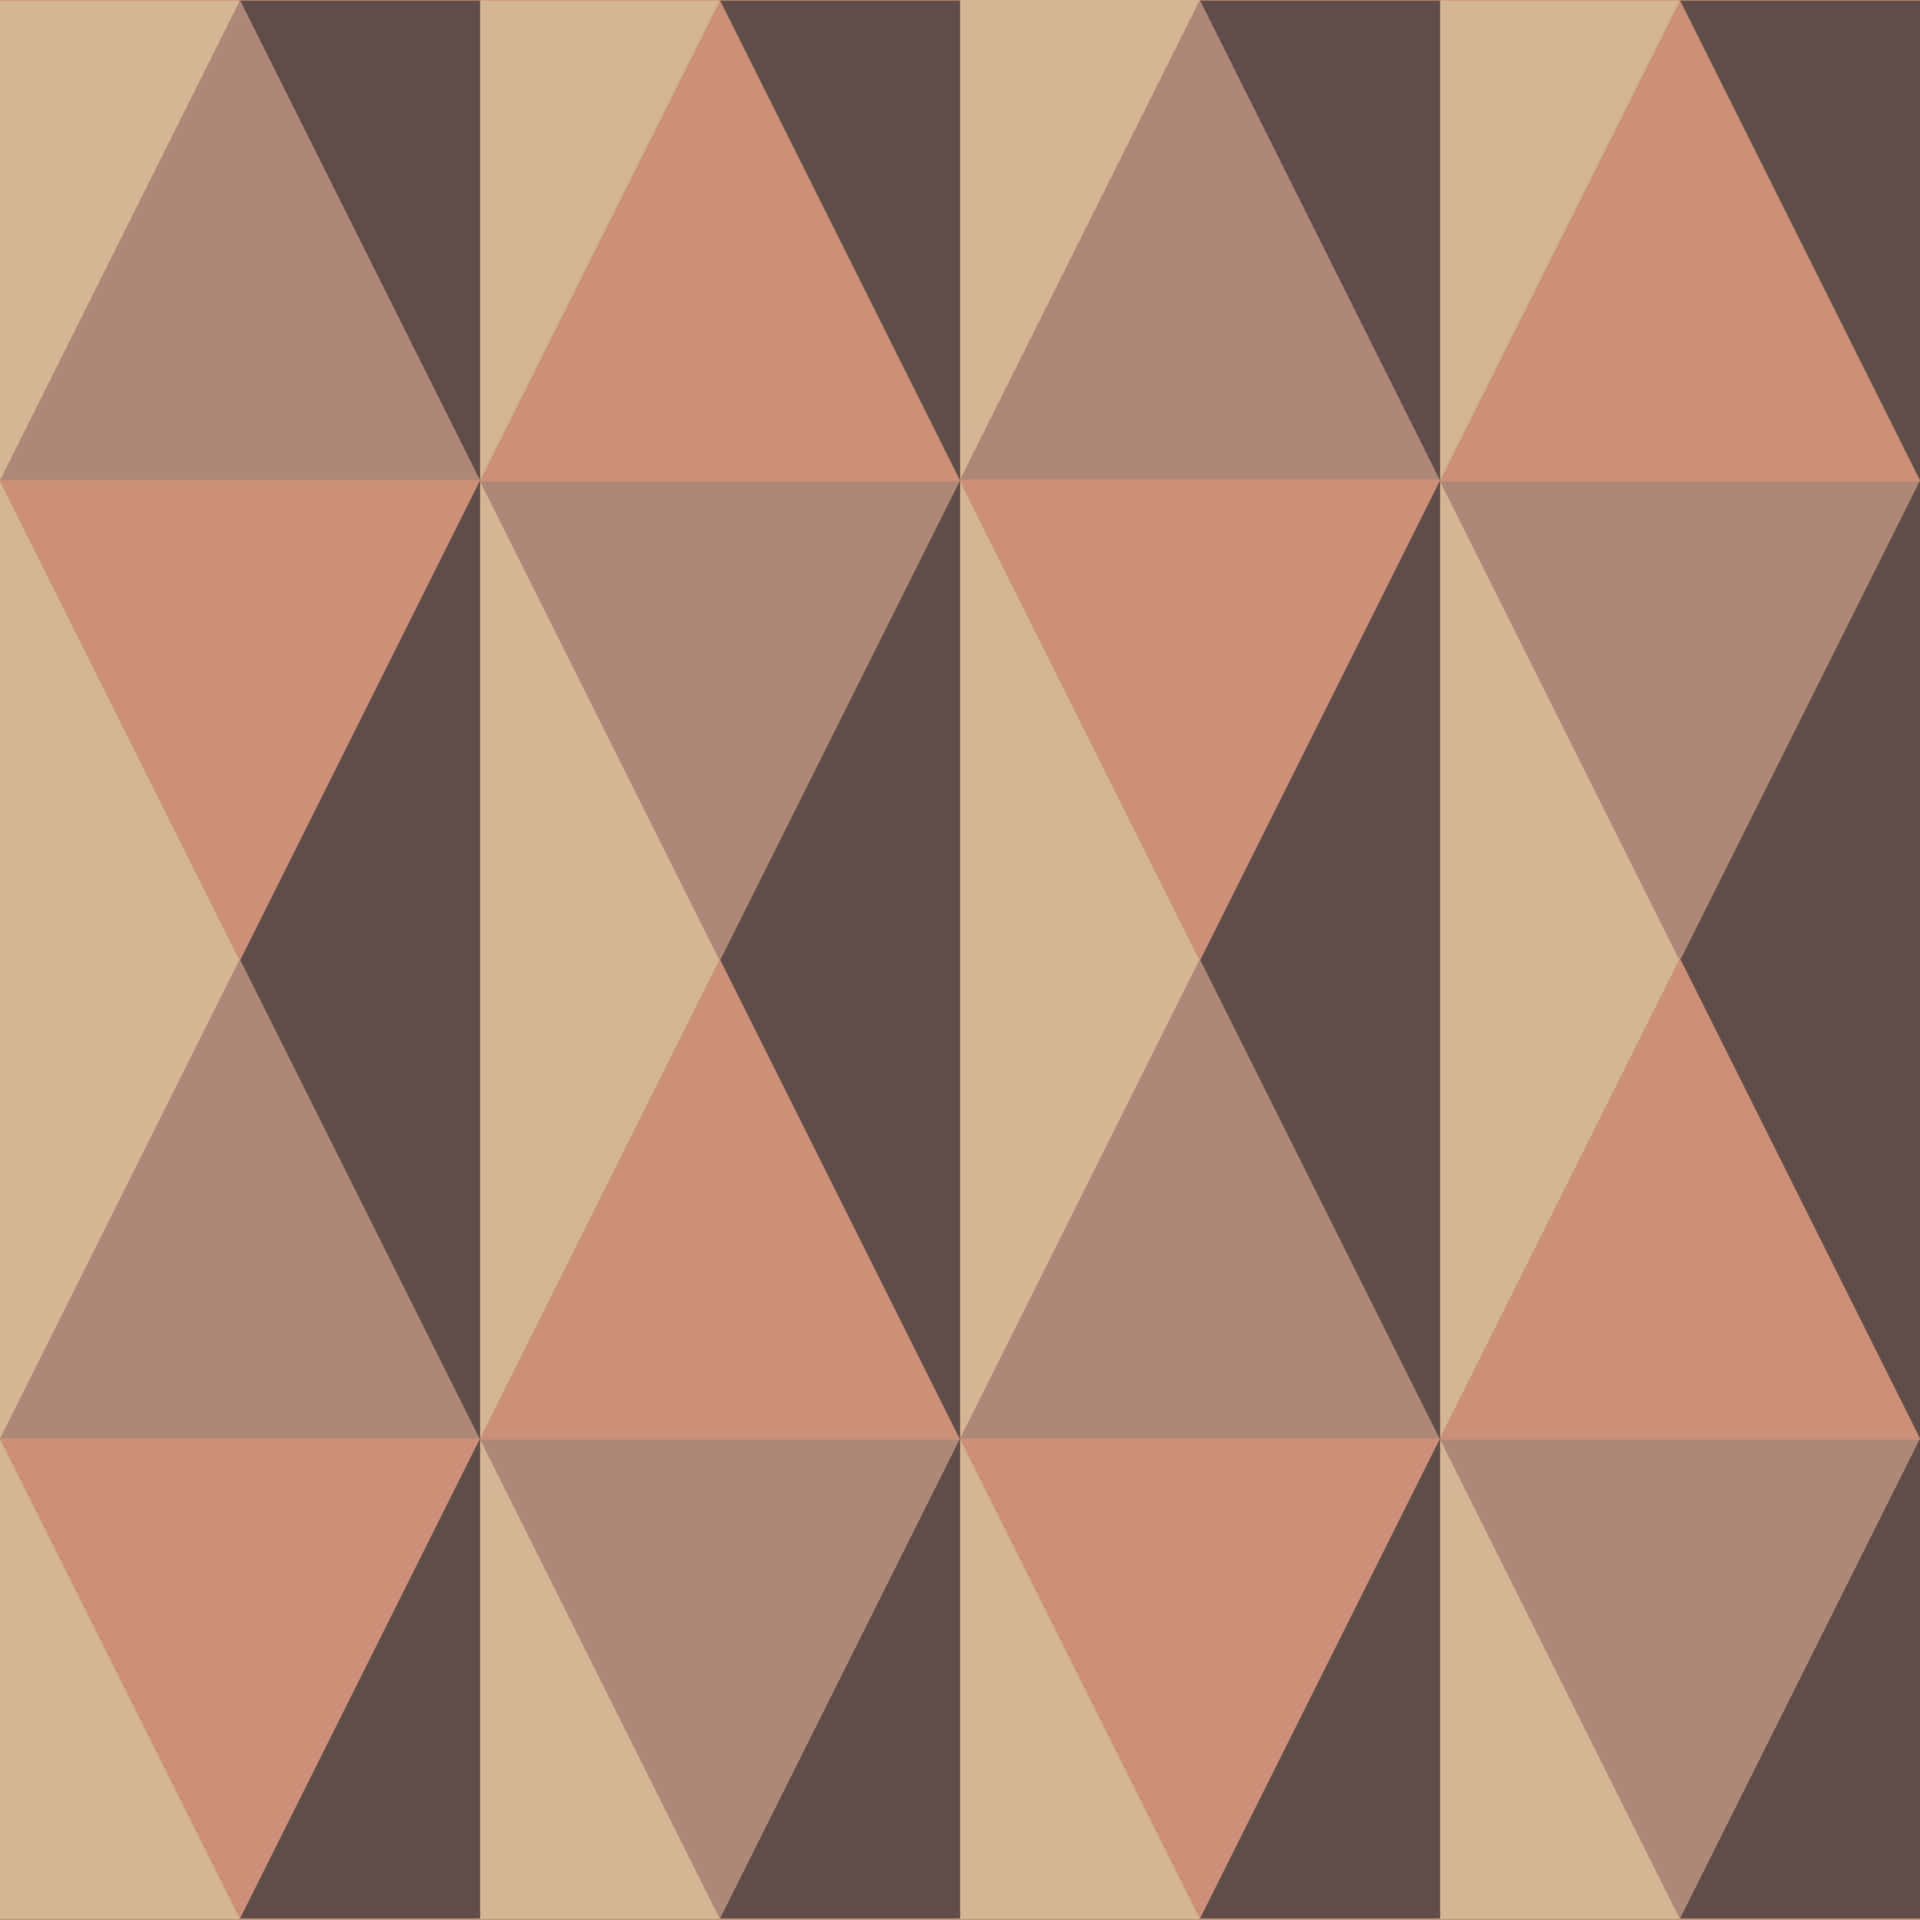 Obtuse Triangles With Earthly Colors Wallpaper